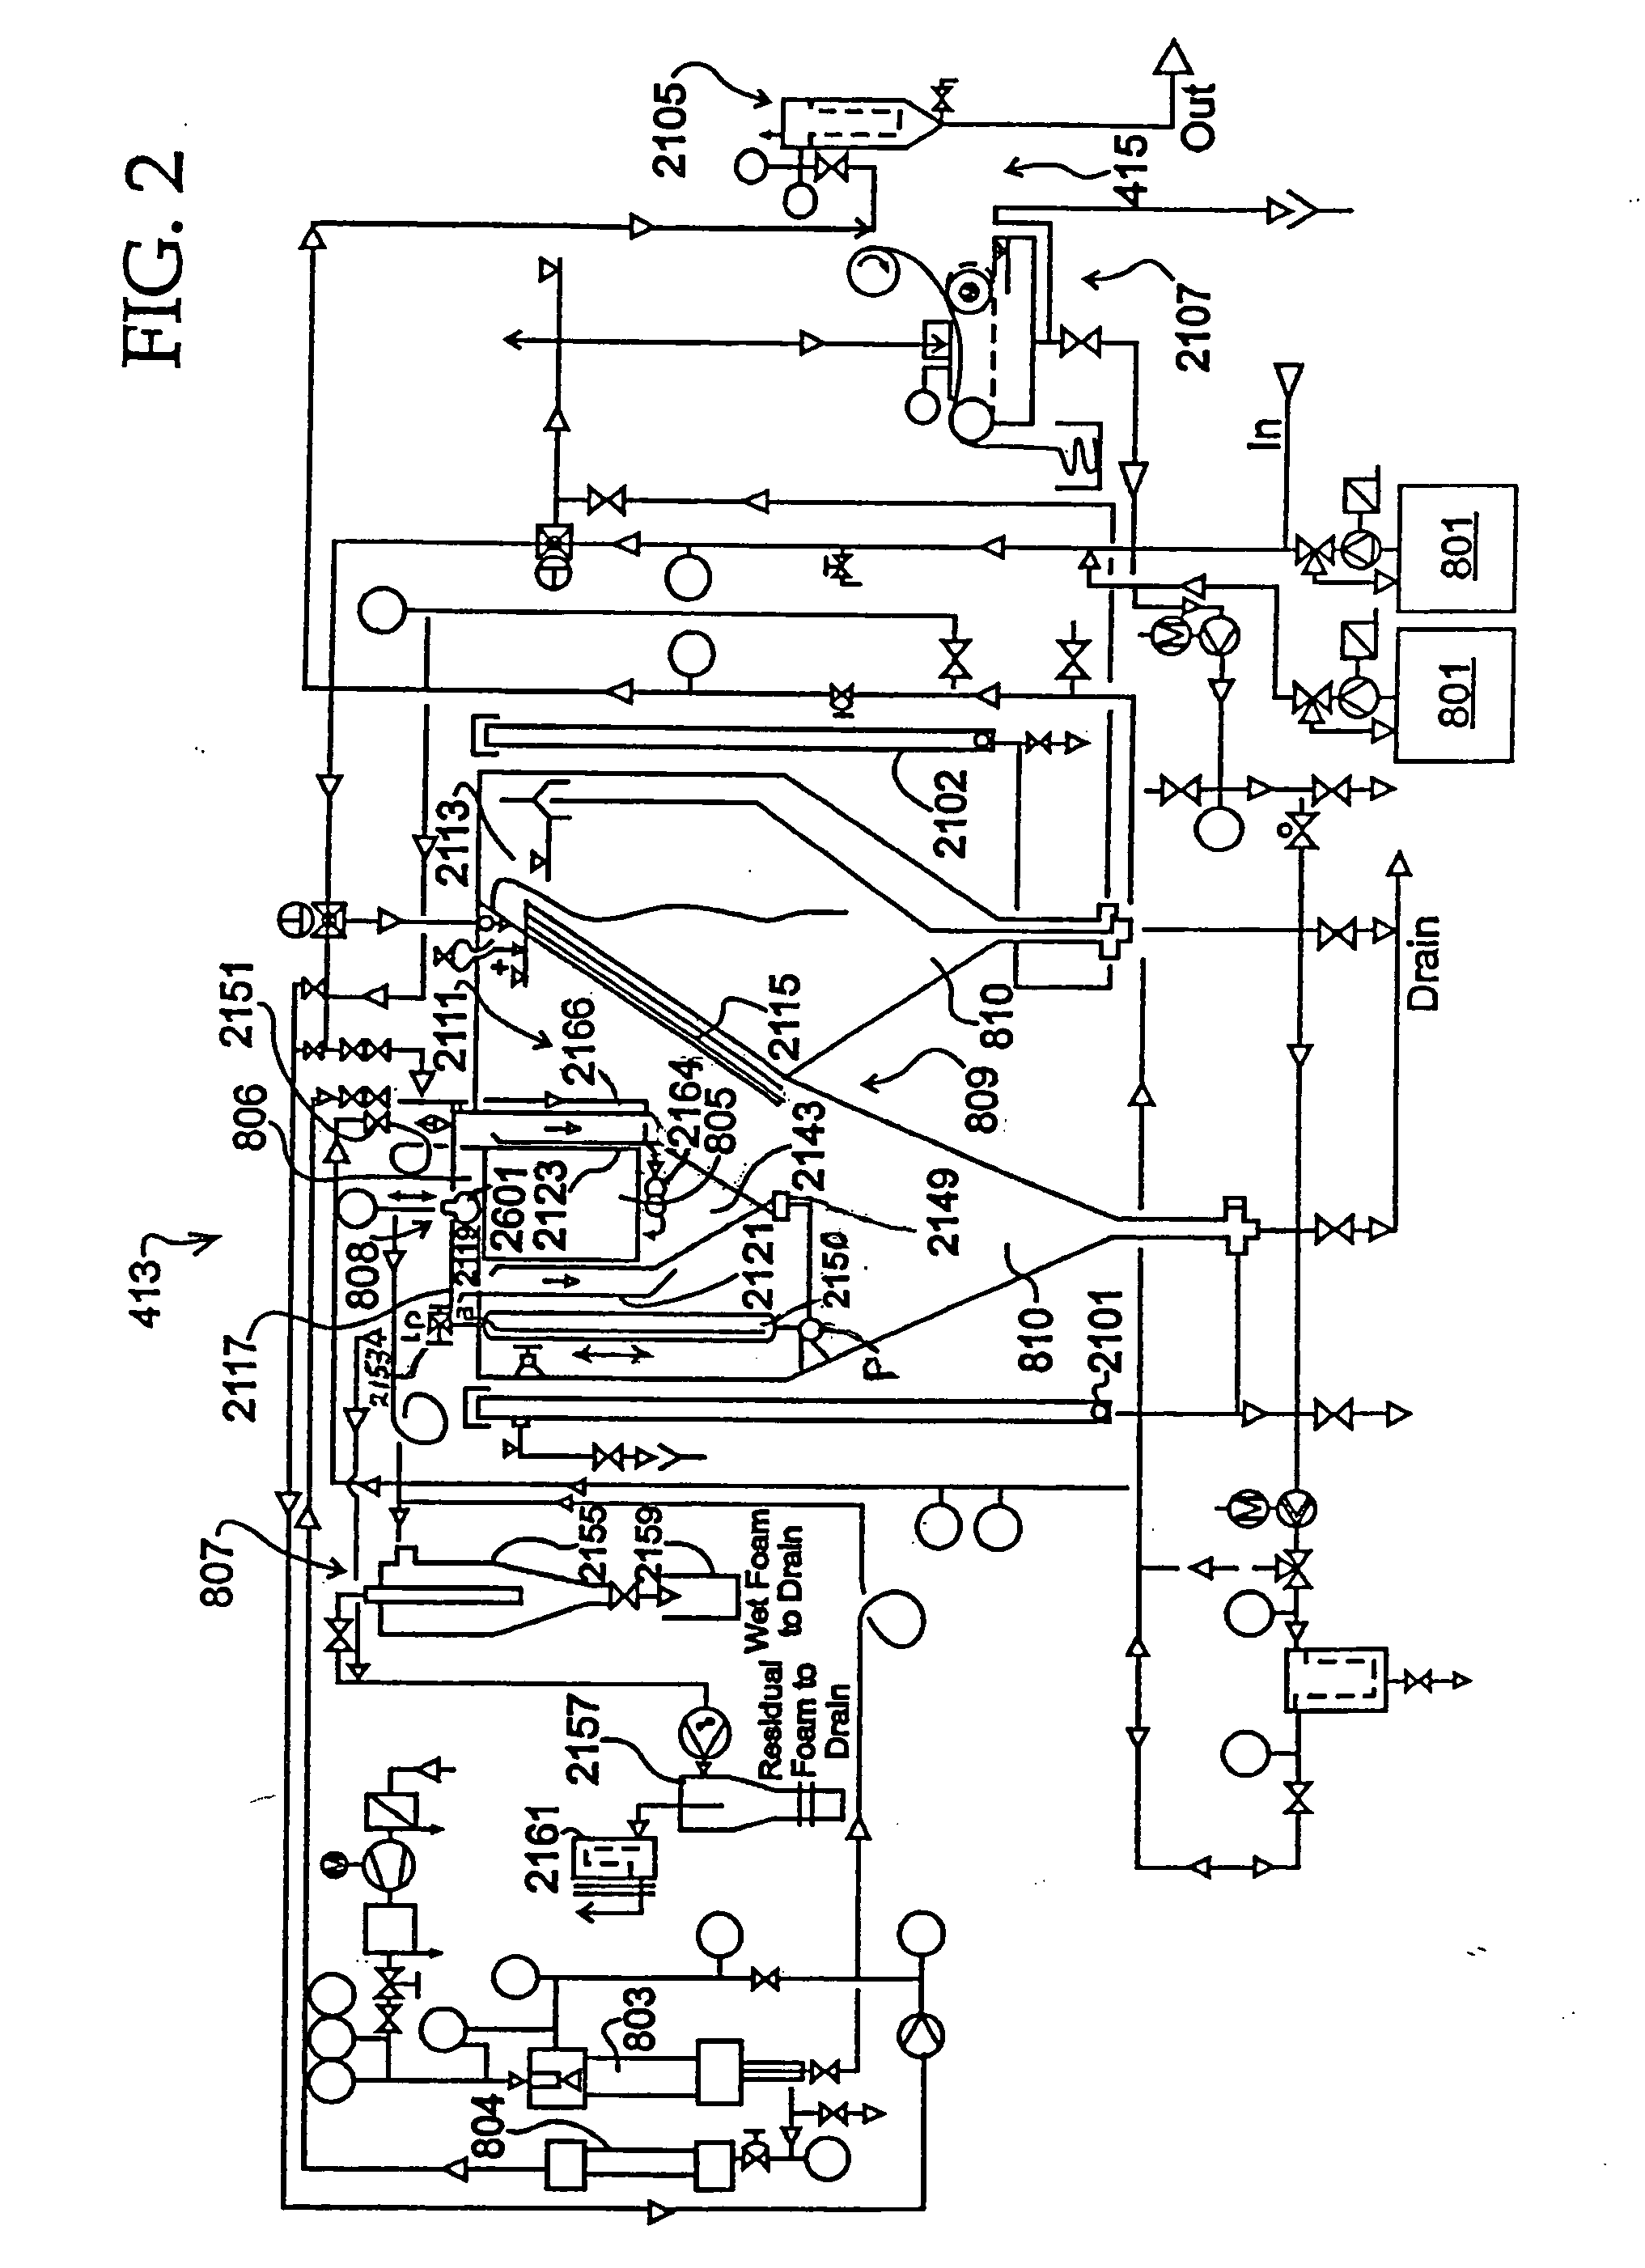 Fluid head height and foam/gas level control in electrocoagulation apparatus